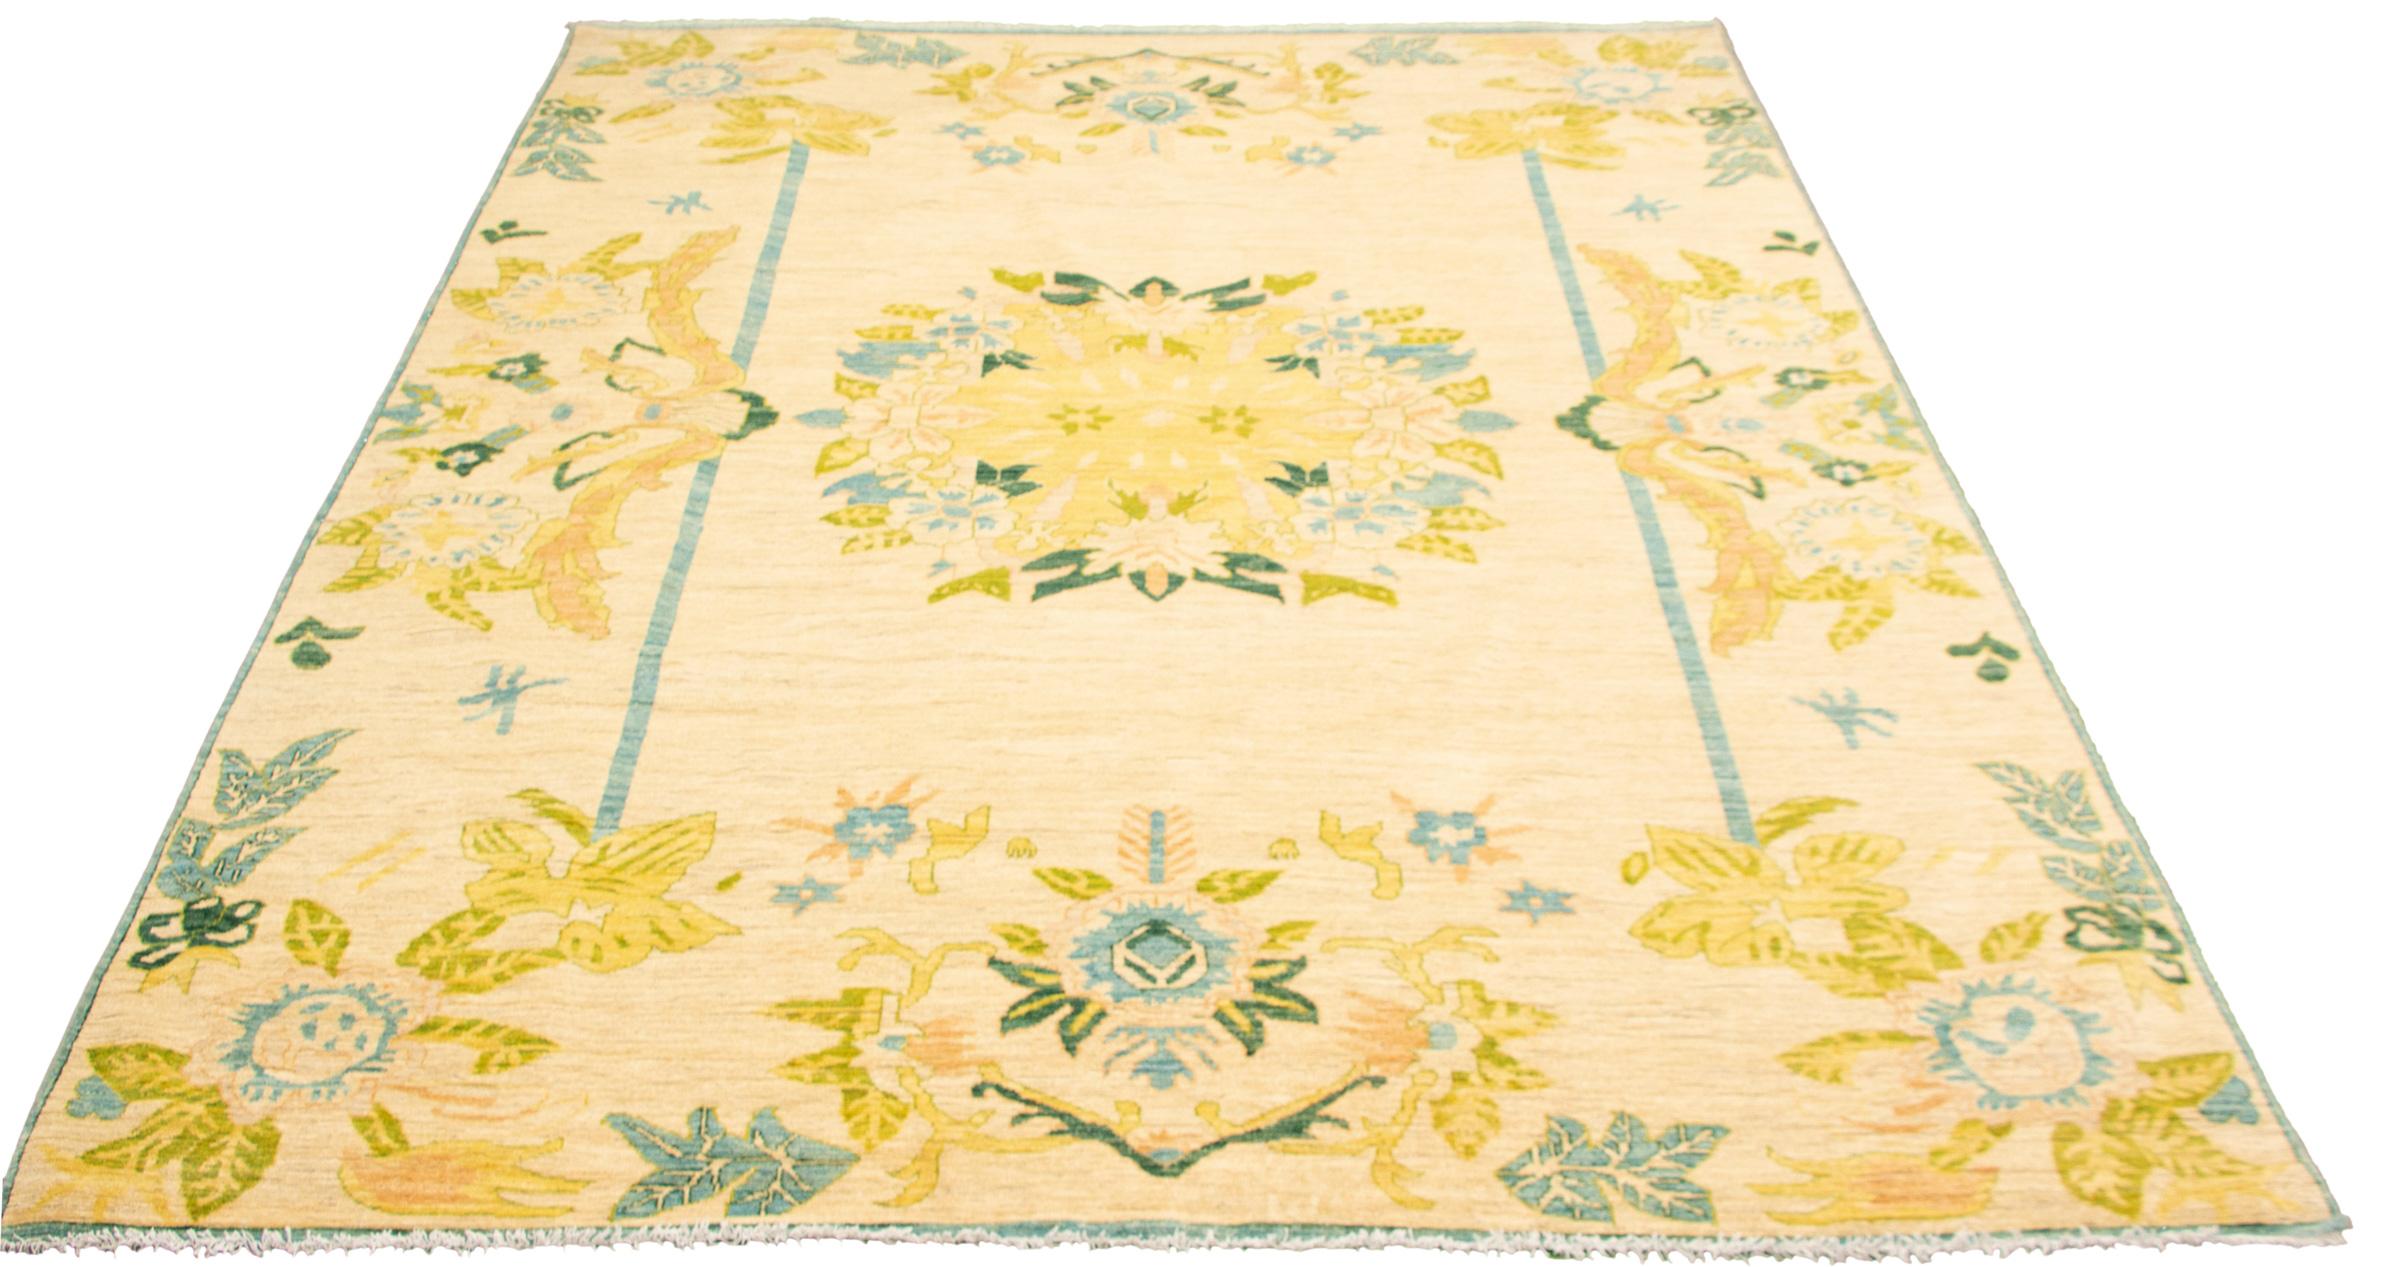 Vegetable Dyed Transitional Pastel Persian Oushak Carpet, Wool, Hand-Knotted, 9' x 12' For Sale